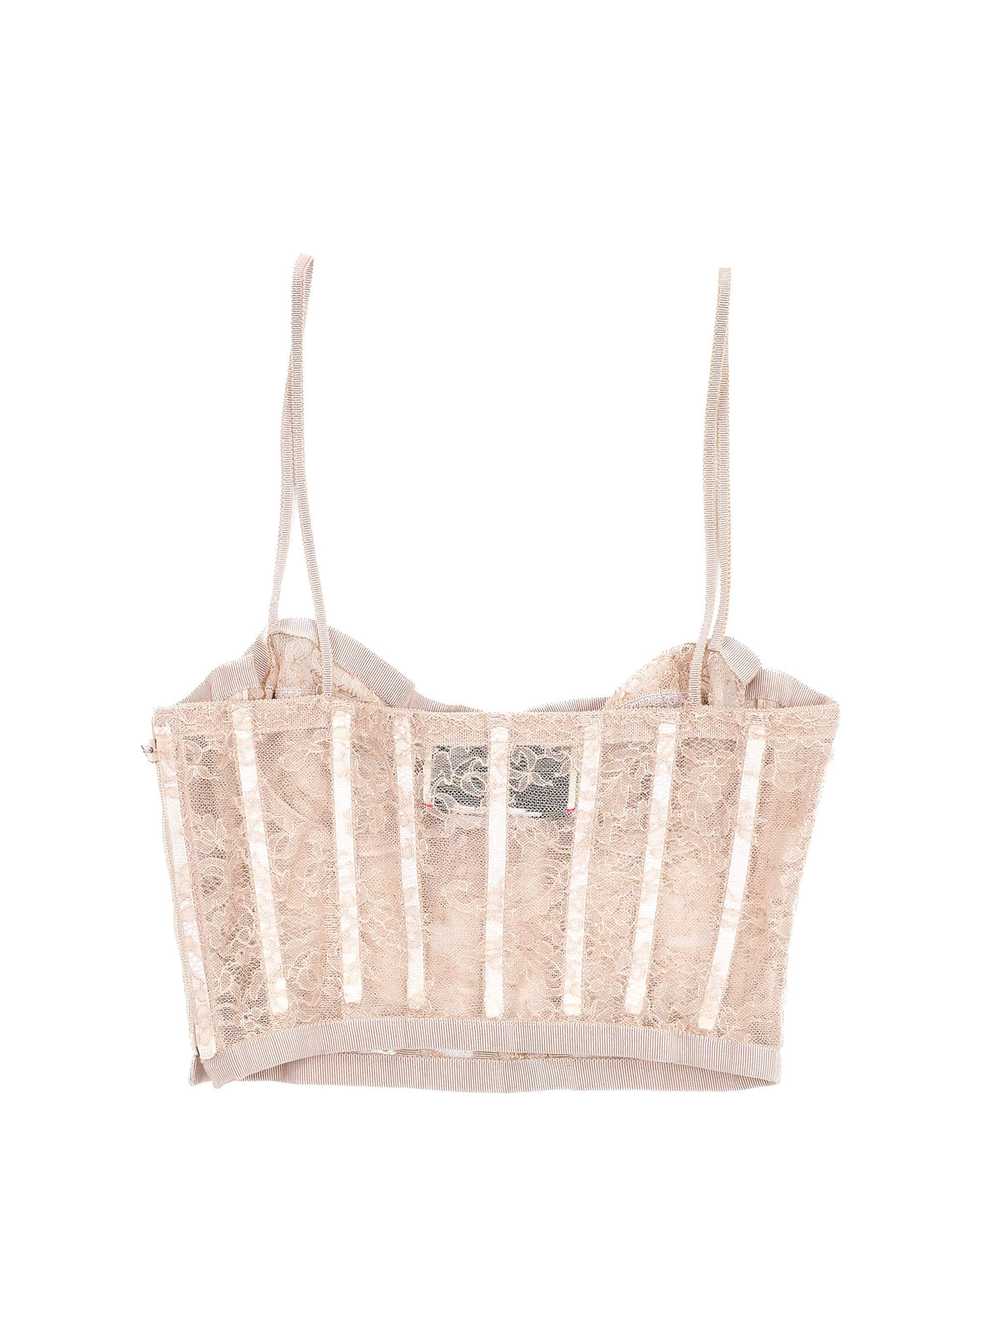 Gucci Nude Lace Bustier - image 3